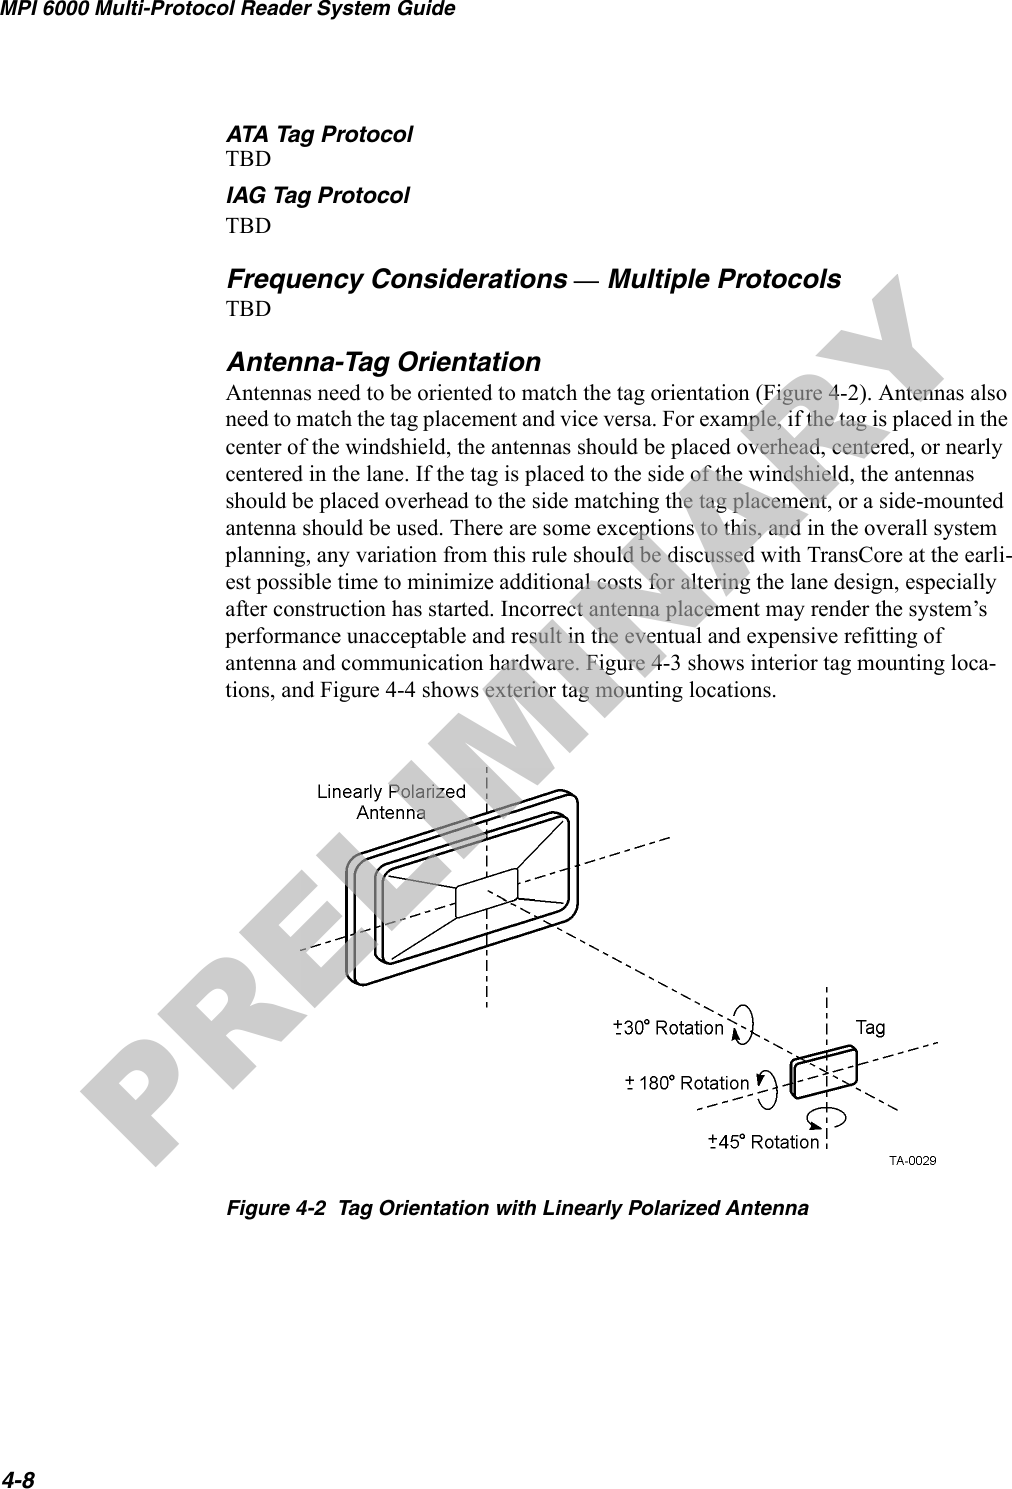 MPI 6000 Multi-Protocol Reader System Guide4-8ATA Tag ProtocolTBDIAG Tag ProtocolTBDFrequency Considerations — Multiple ProtocolsTBDAntenna-Tag OrientationAntennas need to be oriented to match the tag orientation (Figure 4-2). Antennas also need to match the tag placement and vice versa. For example, if the tag is placed in the center of the windshield, the antennas should be placed overhead, centered, or nearly centered in the lane. If the tag is placed to the side of the windshield, the antennas should be placed overhead to the side matching the tag placement, or a side-mounted antenna should be used. There are some exceptions to this, and in the overall system planning, any variation from this rule should be discussed with TransCore at the earli-est possible time to minimize additional costs for altering the lane design, especially after construction has started. Incorrect antenna placement may render the system’s performance unacceptable and result in the eventual and expensive refitting of antenna and communication hardware. Figure 4-3 shows interior tag mounting loca-tions, and Figure 4-4 shows exterior tag mounting locations.Figure 4-2  Tag Orientation with Linearly Polarized AntennaPRELIMINARY